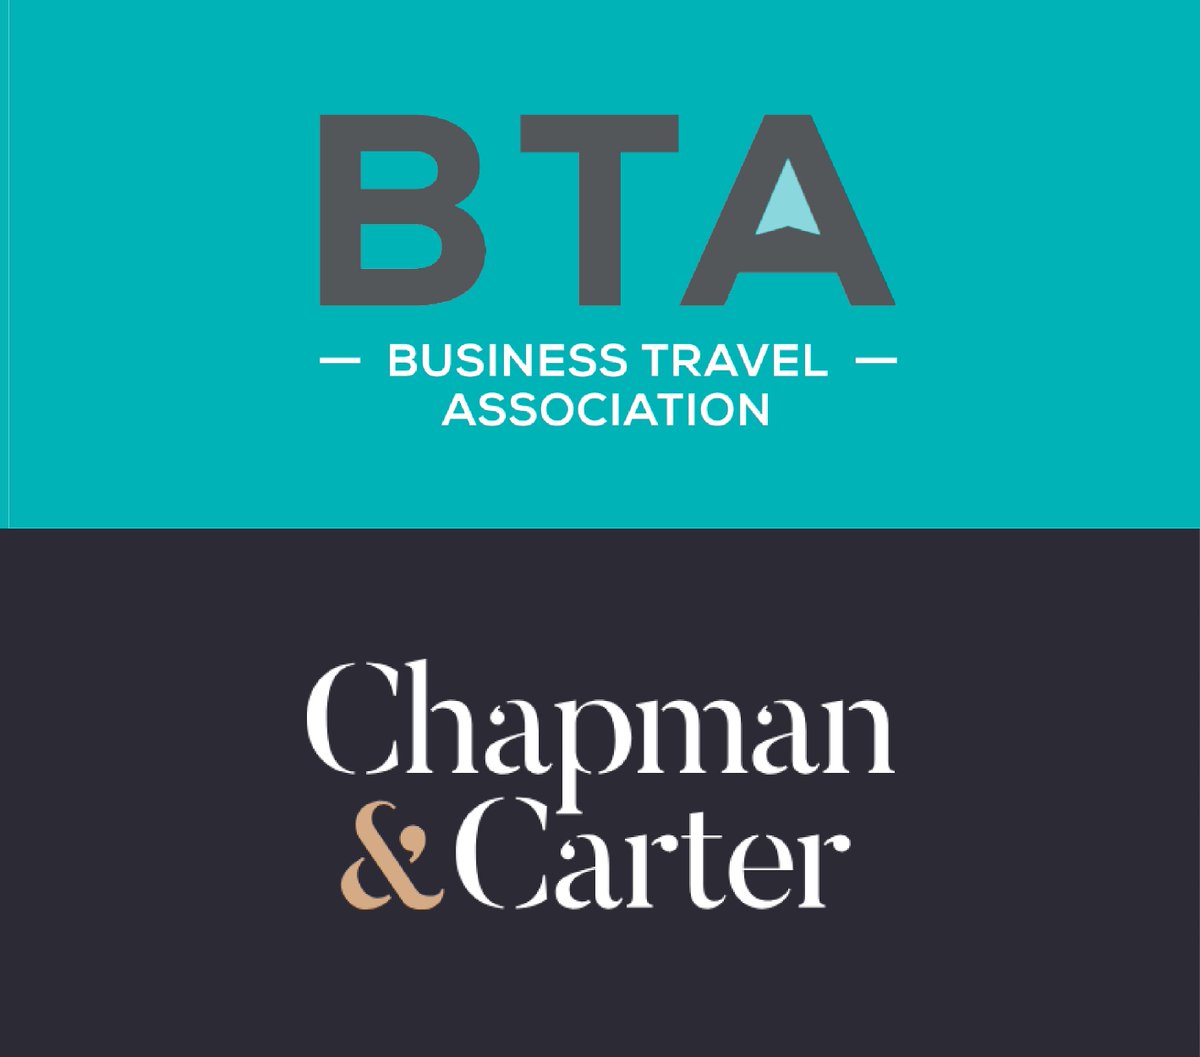 We’re thrilled to welcome Chapman & Carter Travel Management to the BTA as our most recent member! 🤝 Their entrance as an up and coming TMC dedicated to corporate, executive, and luxury travel adds a valuable viewpoint to our association. It’s great to have you on board.